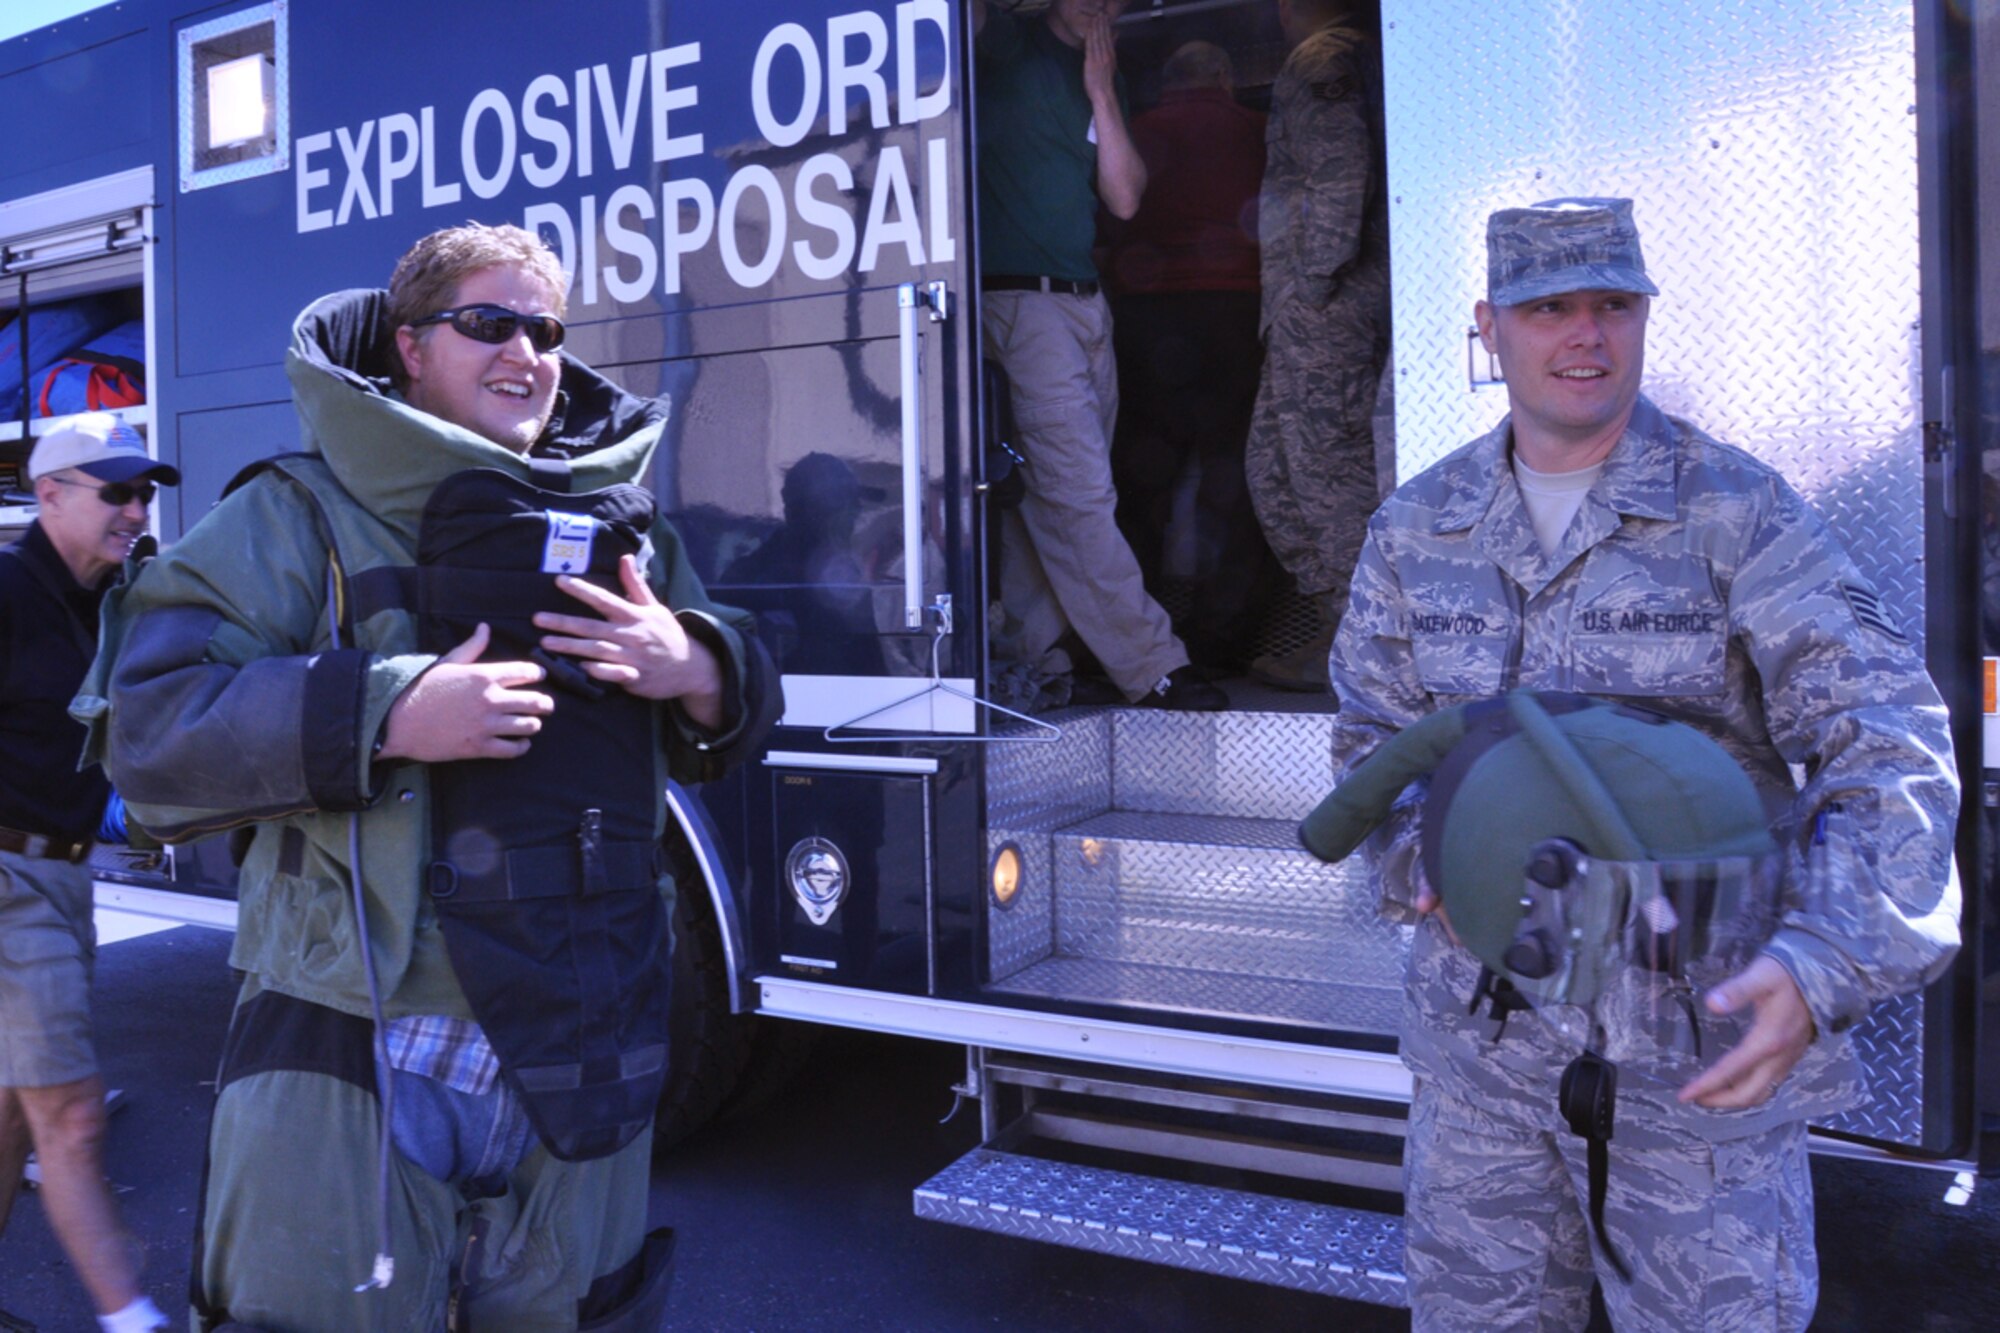 Nathan Anderson, a civilian employer from Nucor Building Systems in Brigham City, tries on a bomb suit during an Explosive Ordnance Disposal demonstration here Sunday as part of Employer Appreciation Day. The suit helps protect EOD technicians when they must detonate a bomb. (U.S. Air Force photo/Staff Sgt. Heather Skinkle)